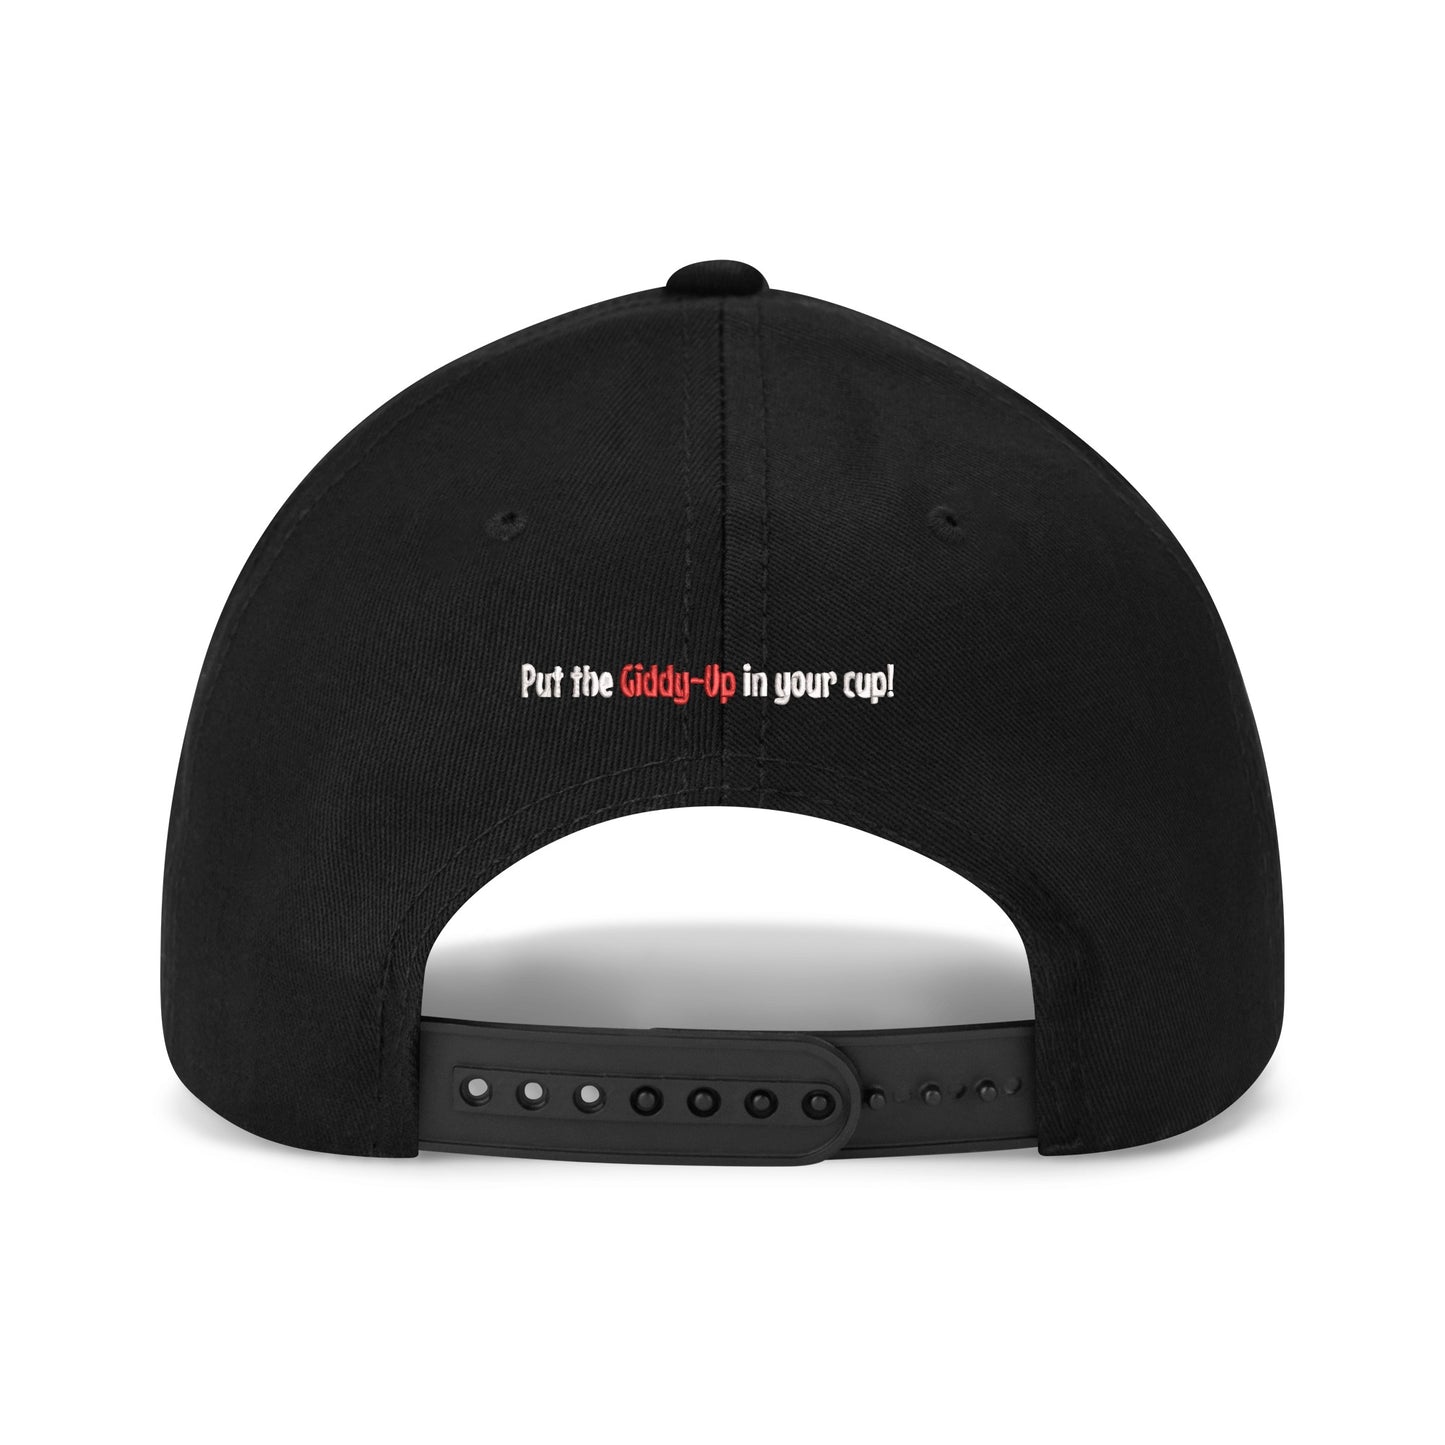 Sure Bet Twill Embroidered Baseball Cap